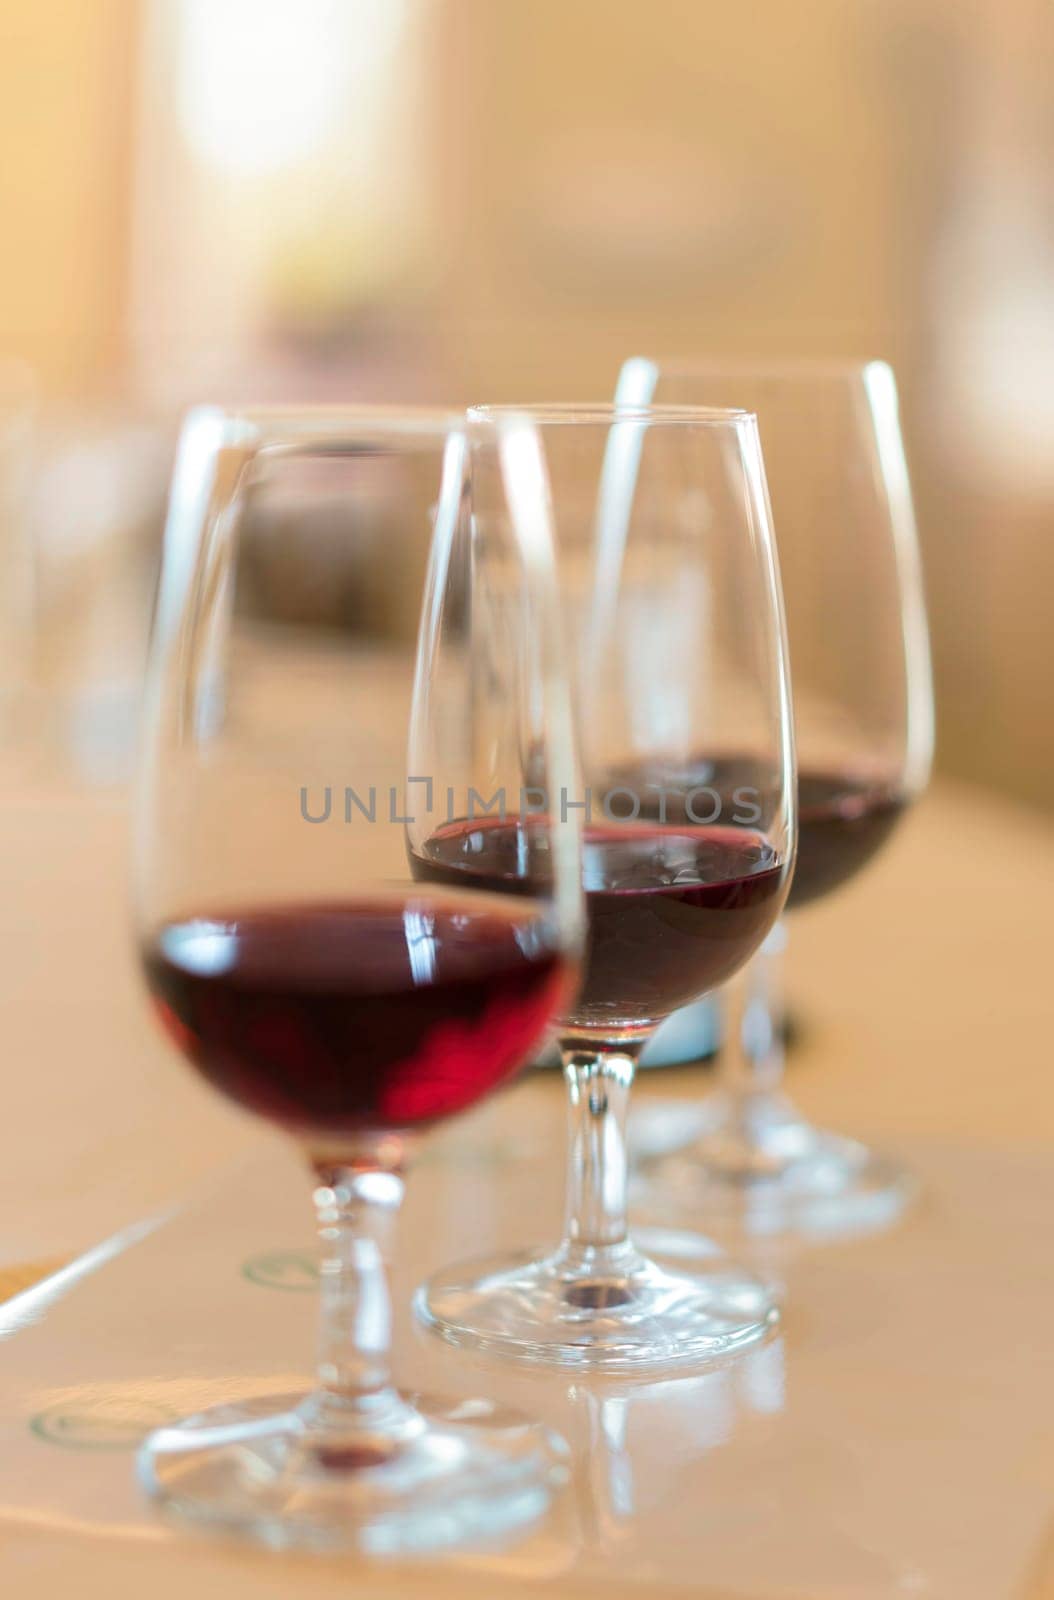 Oenology tasting glasses against a blurry background showcasing great red wine vintages with a delicate calyx capturing aromas while stems provide a graceful hold providing a refined wine experience.